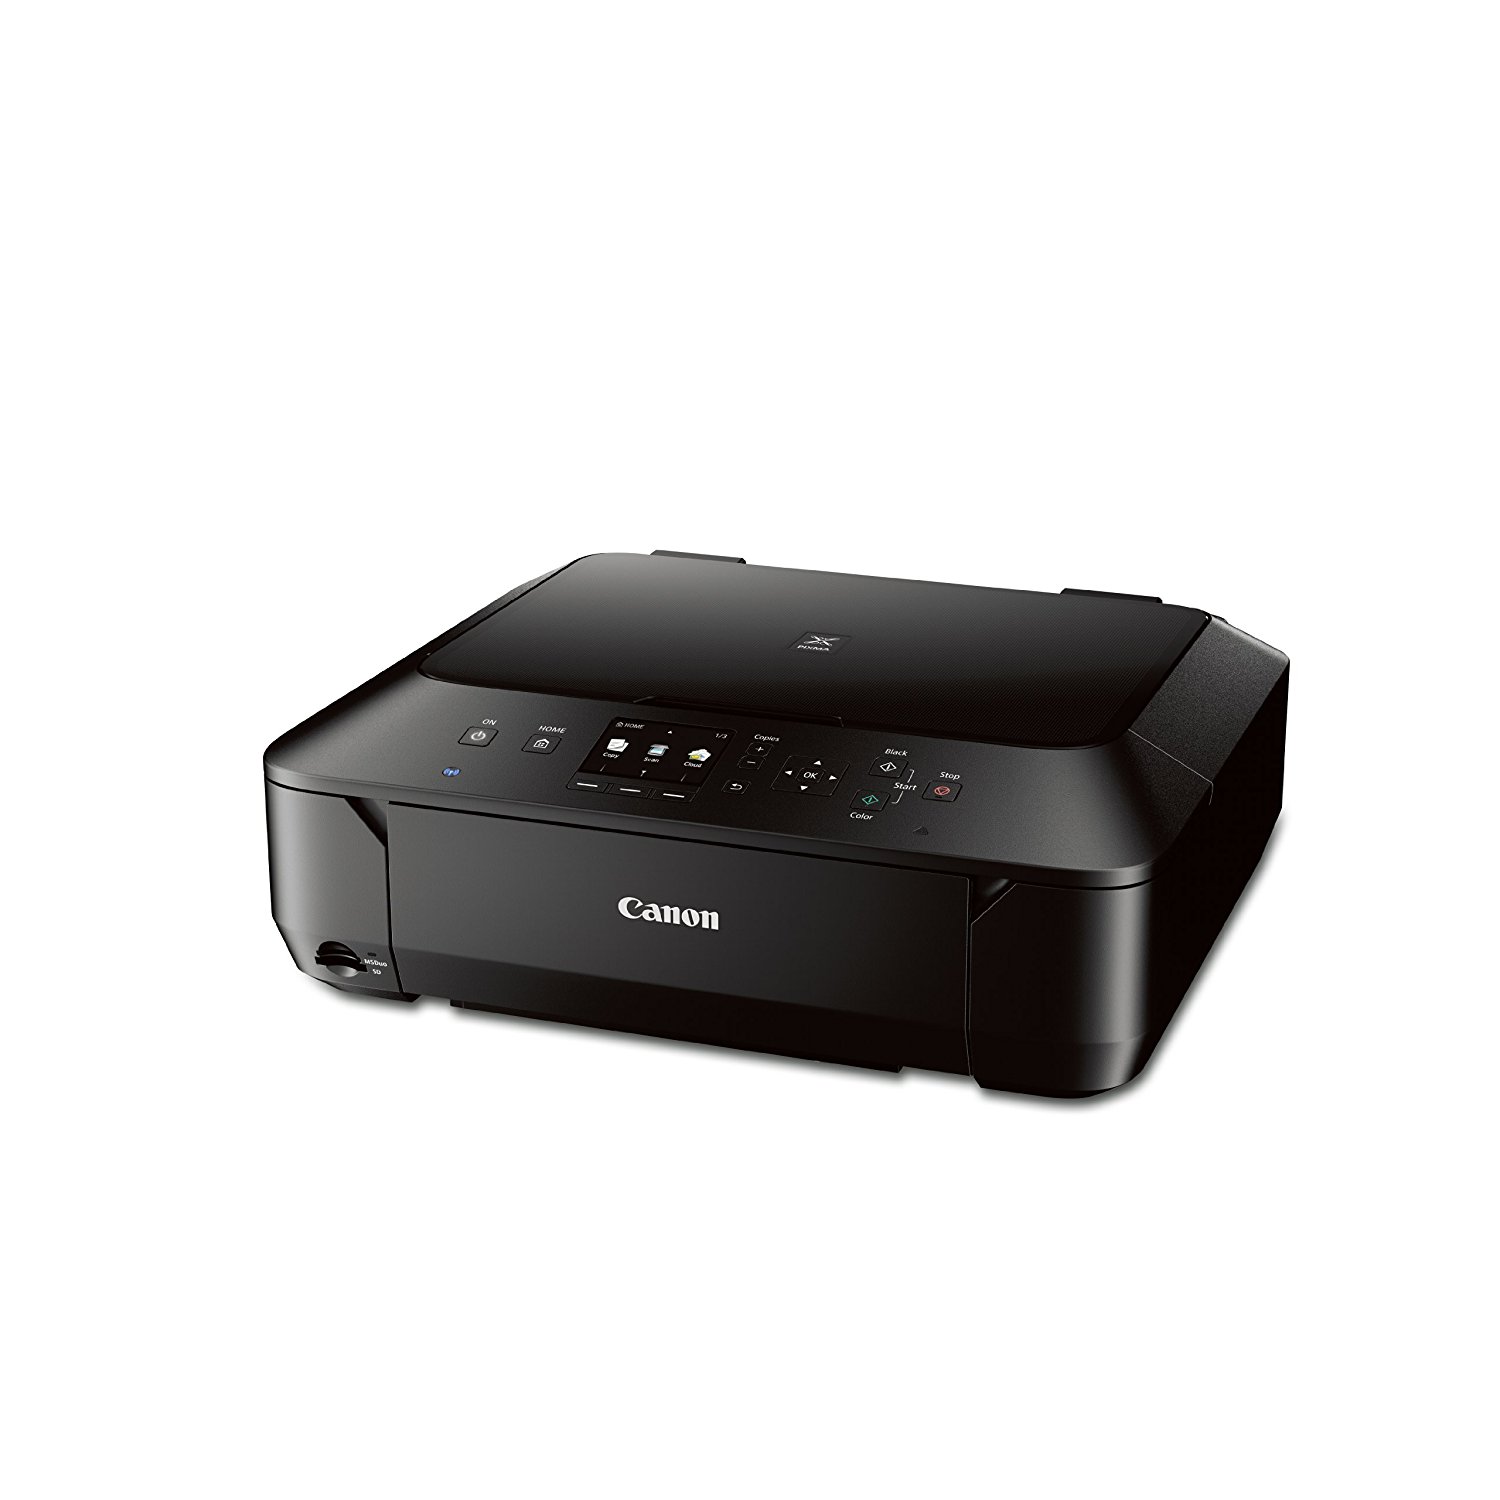 Canon Pixma Mg6420 Wireless Inkjet All In One Printer Discontinued By Manufacturer N9 Free 1665